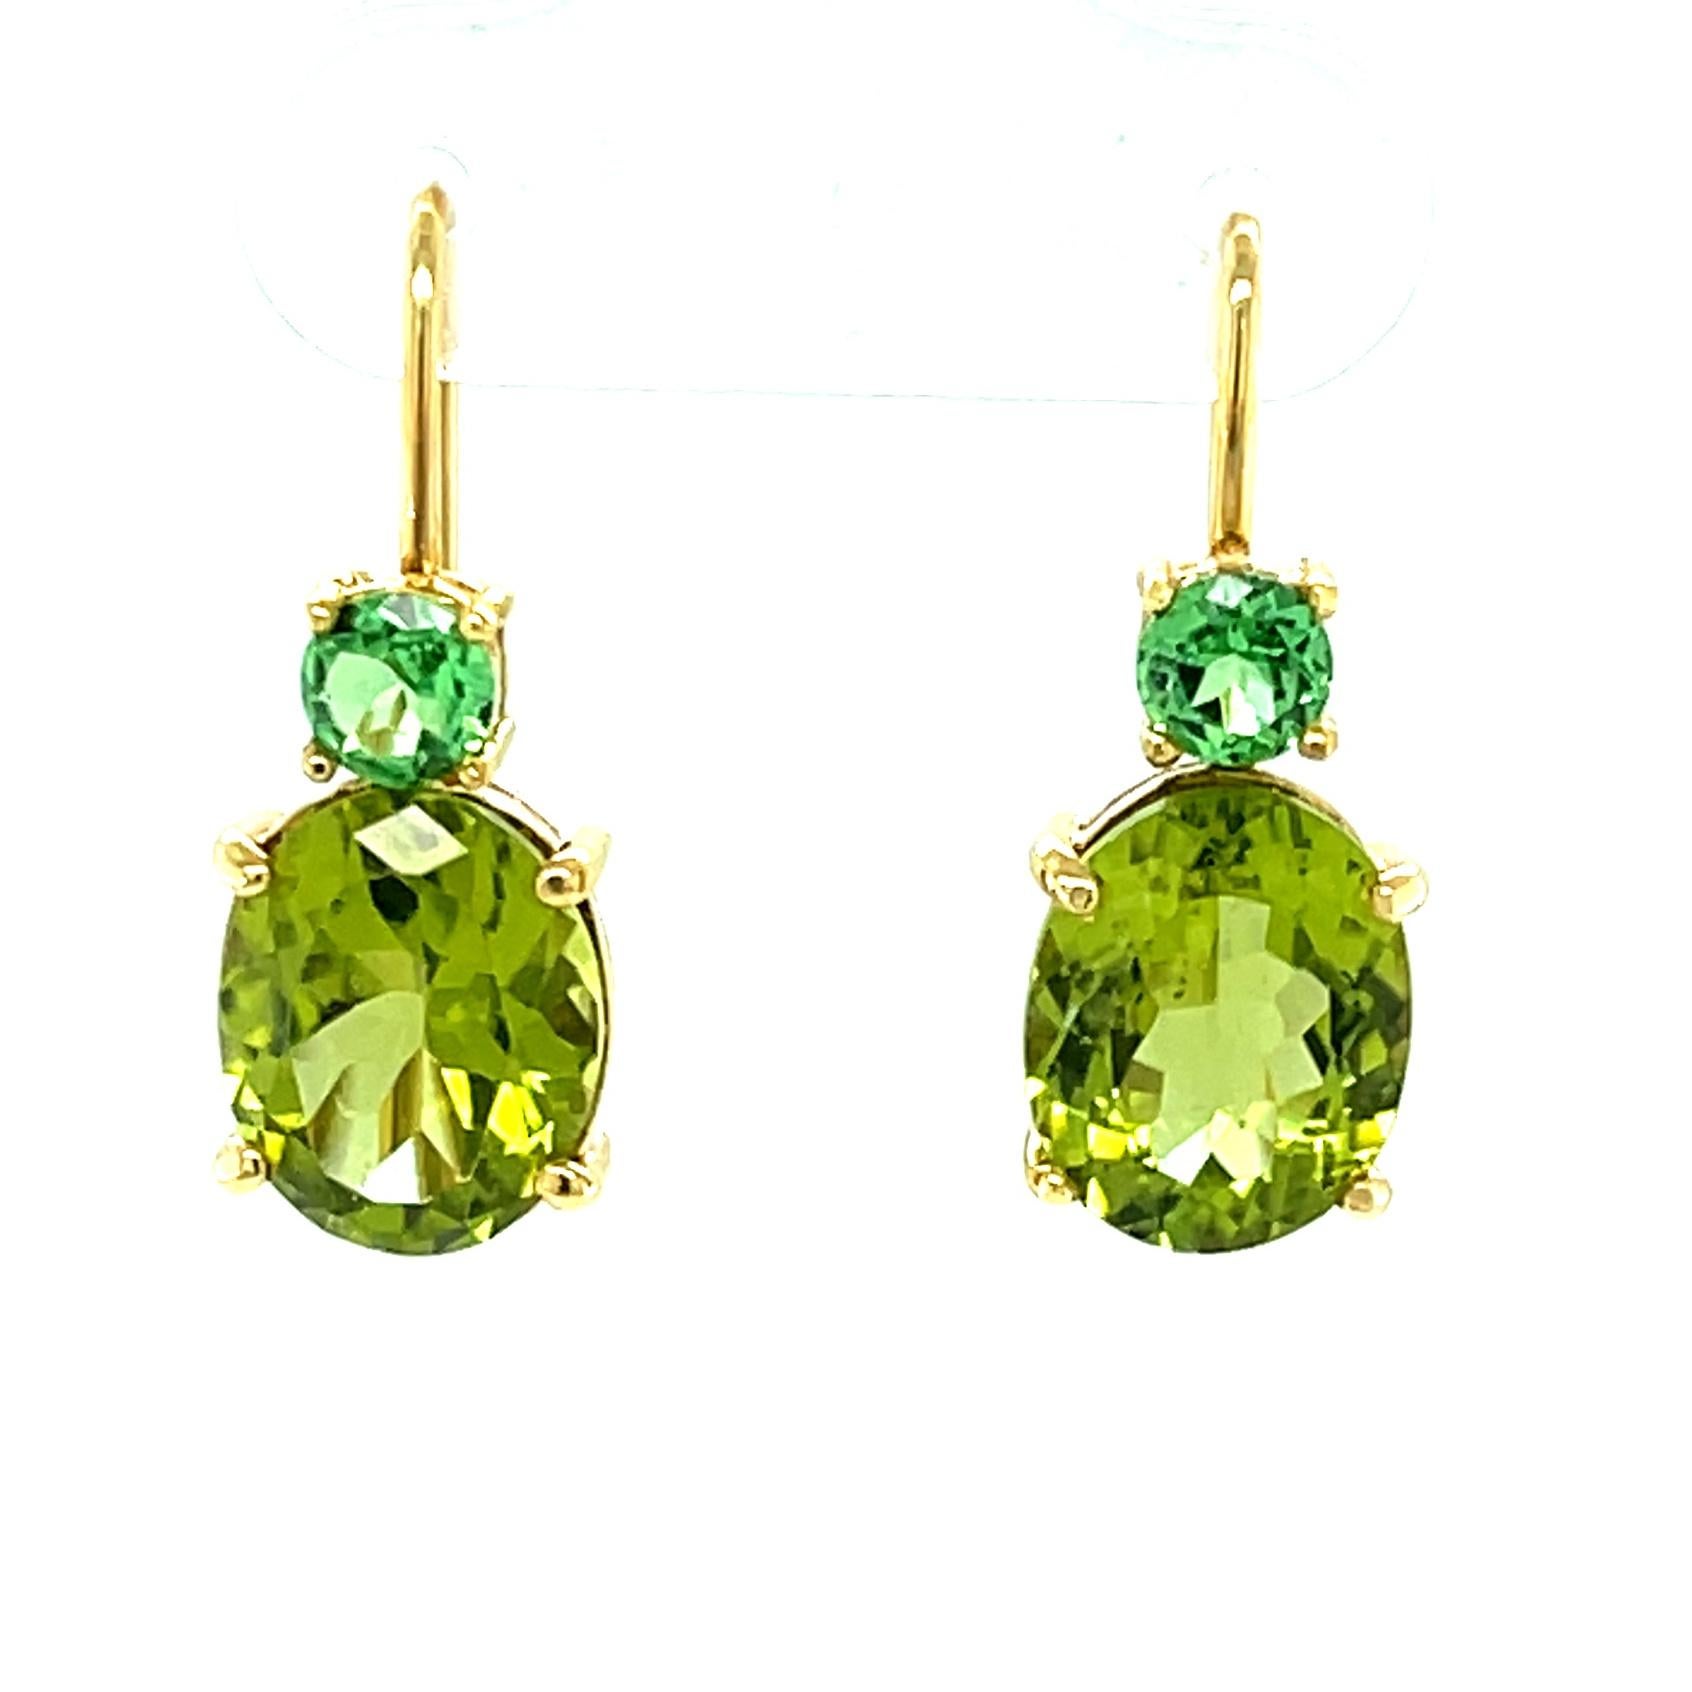 Our Color Pairings Collection offers effortless style, high quality, and unusual gemstones for endless versatility. These handmade 18k yellow gold earrings feature lovely oval shaped peridots paired with bright round tsavorite garnets for a unique